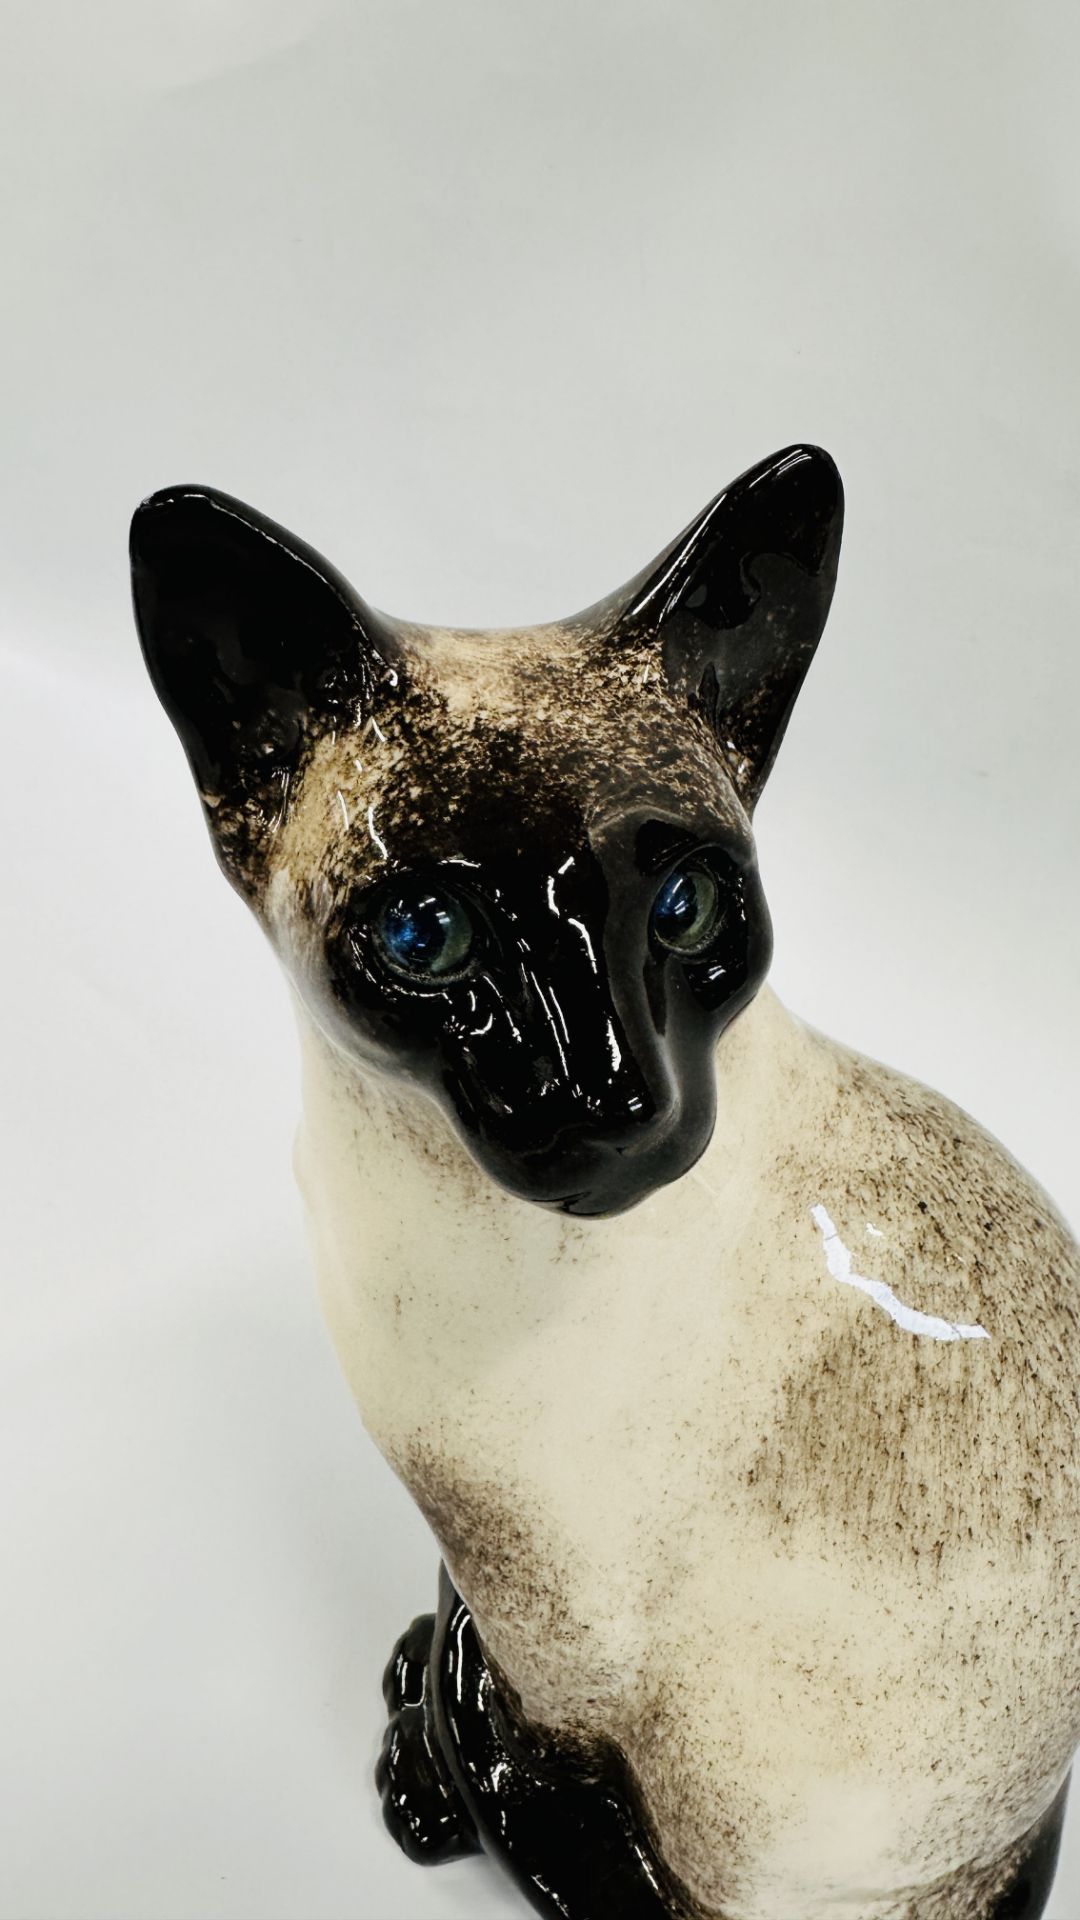 A HANDCRAFTED WINSTANLEY NO. 5 SEATED CAT FIGURE - HEIGHT 32CM. - Image 2 of 6